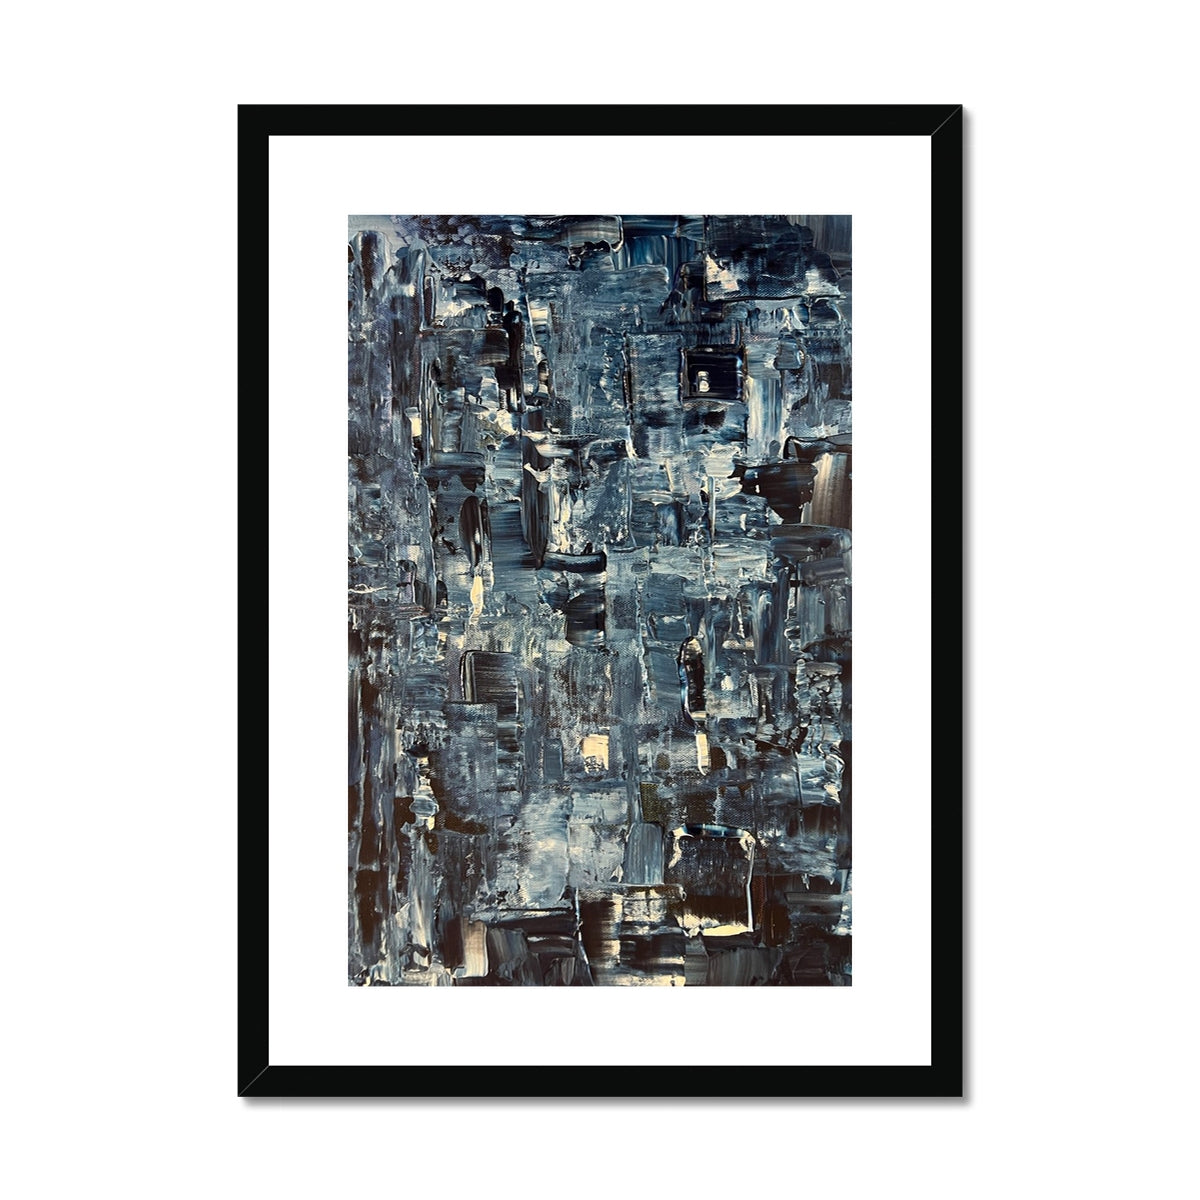 Inception Abstract Painting | Framed & Mounted Prints From Scotland-Framed & Mounted Prints-Abstract & Impressionistic Art Gallery-A2 Portrait-Black Frame-Paintings, Prints, Homeware, Art Gifts From Scotland By Scottish Artist Kevin Hunter